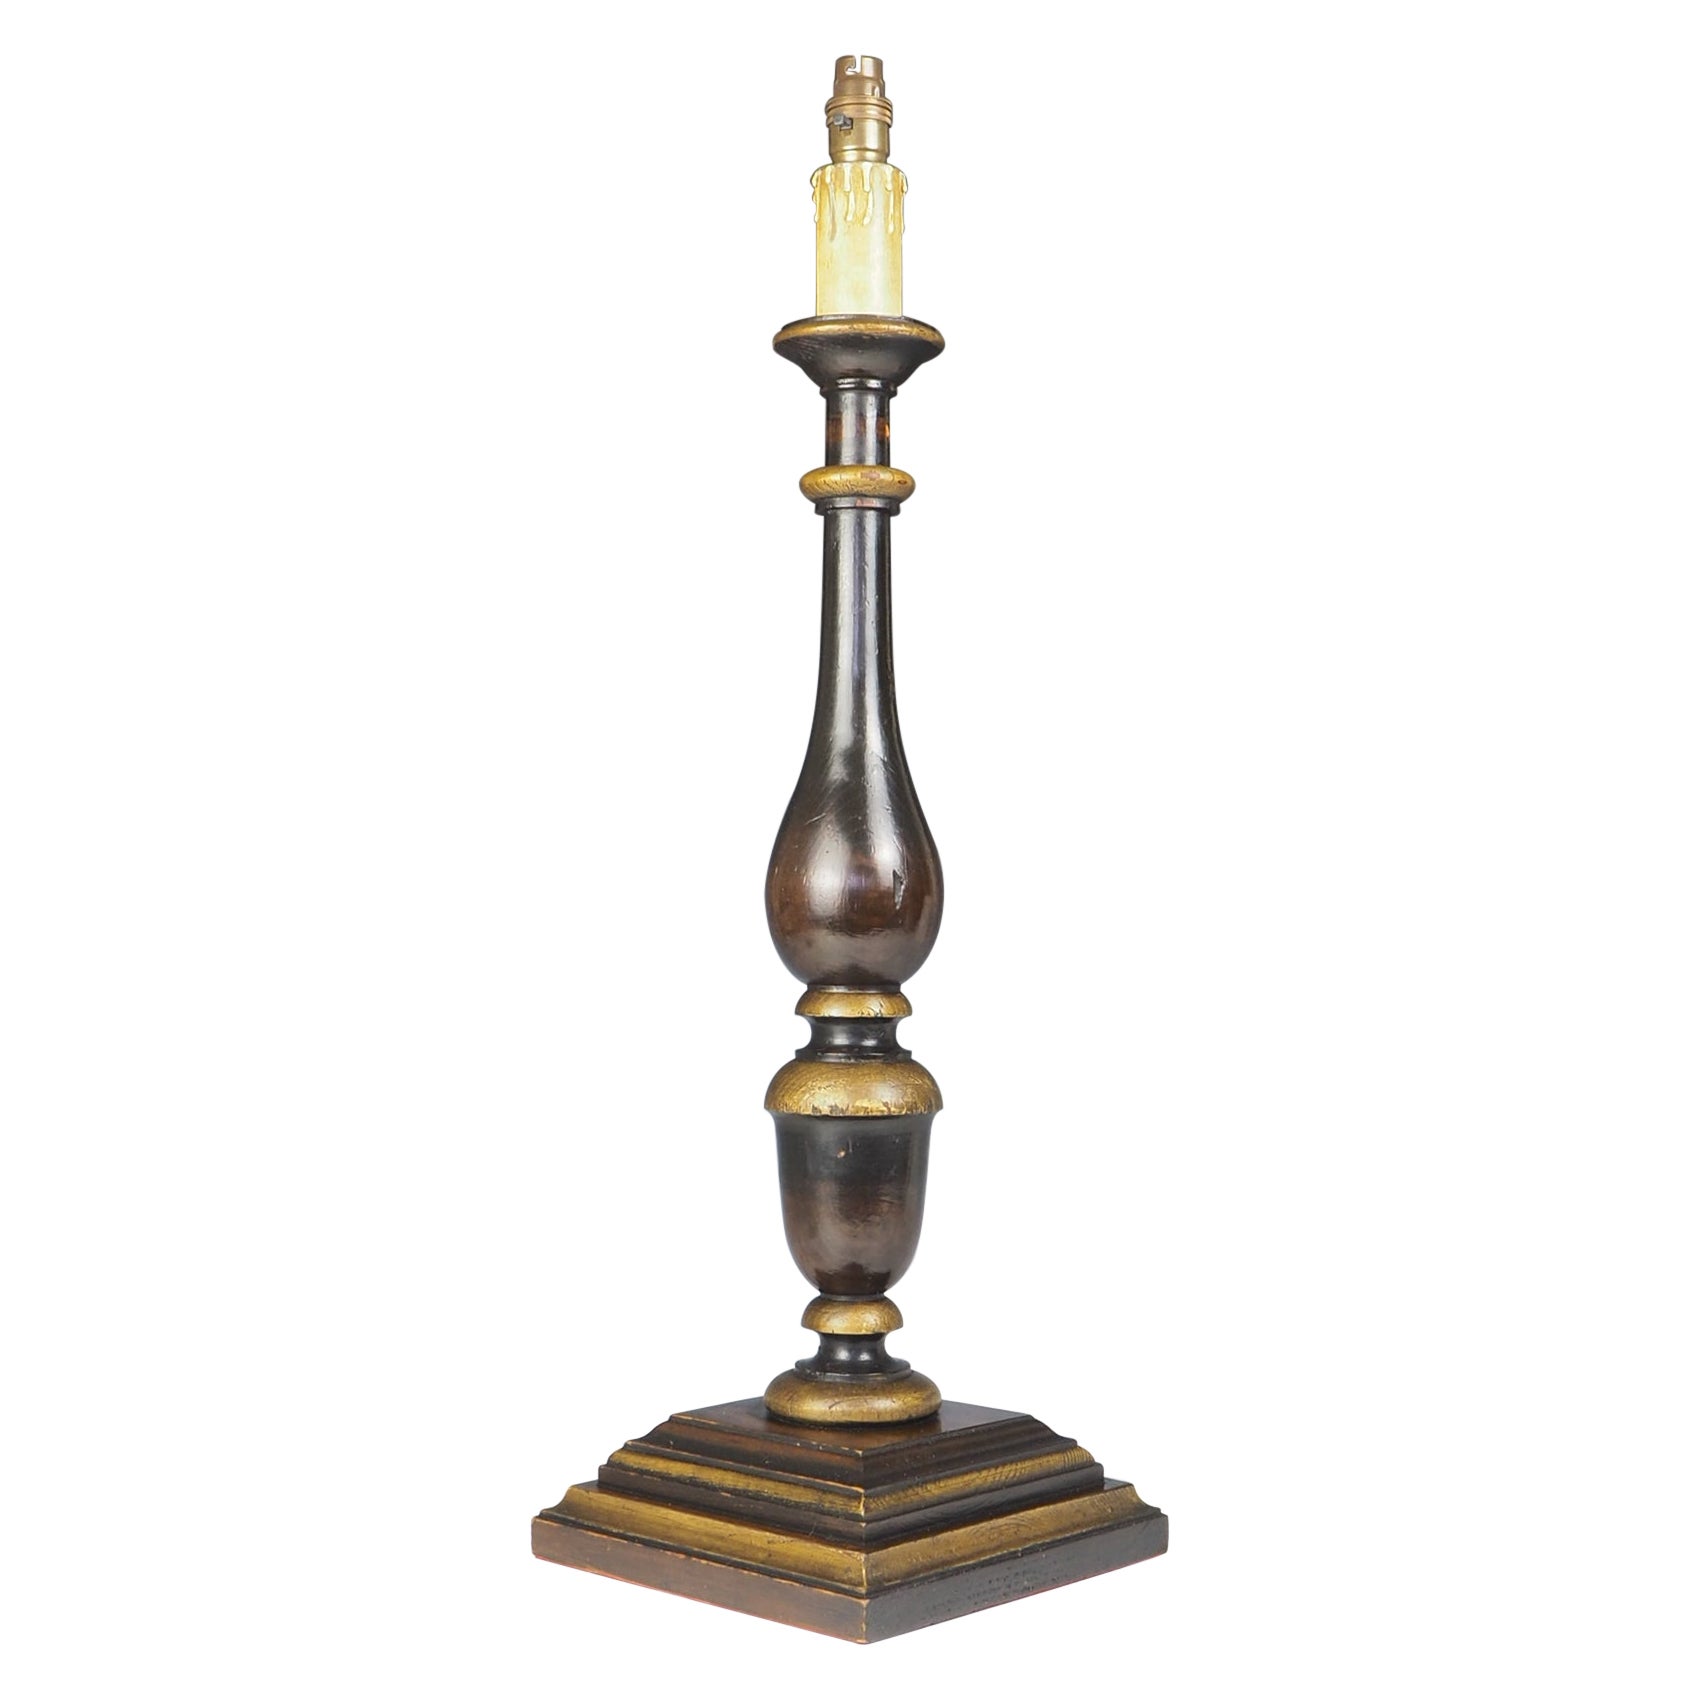 English Country House Antique Table Lamp